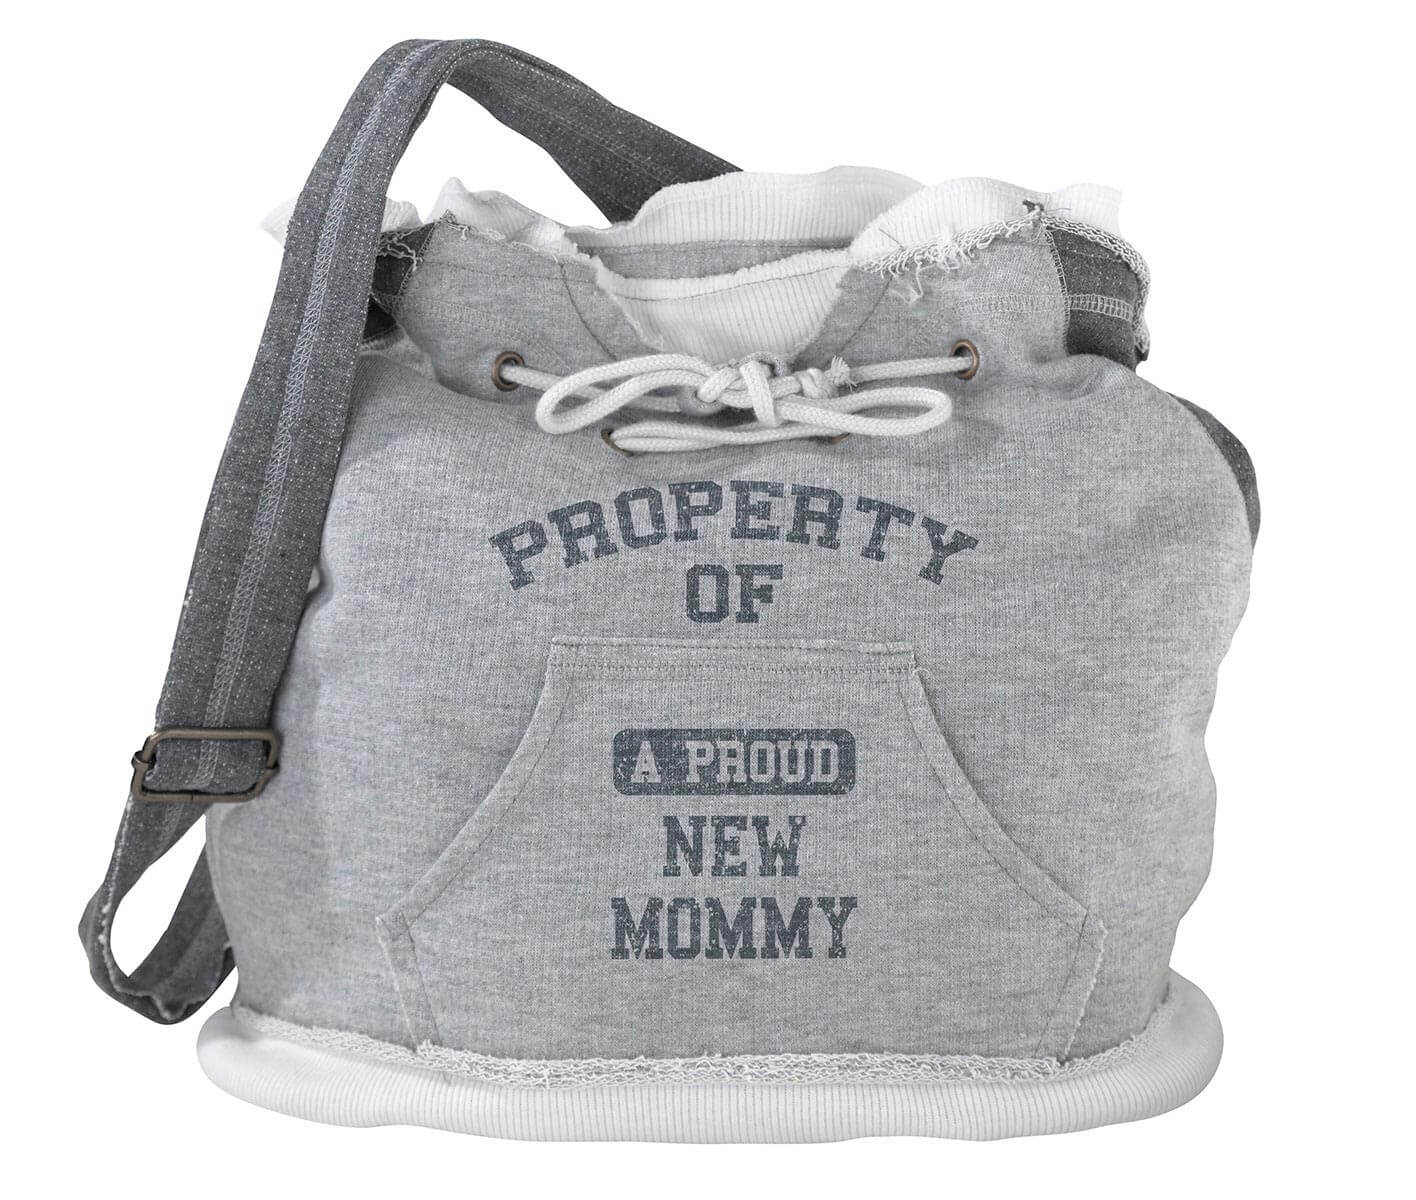 Property of Mommy Diaper Bag